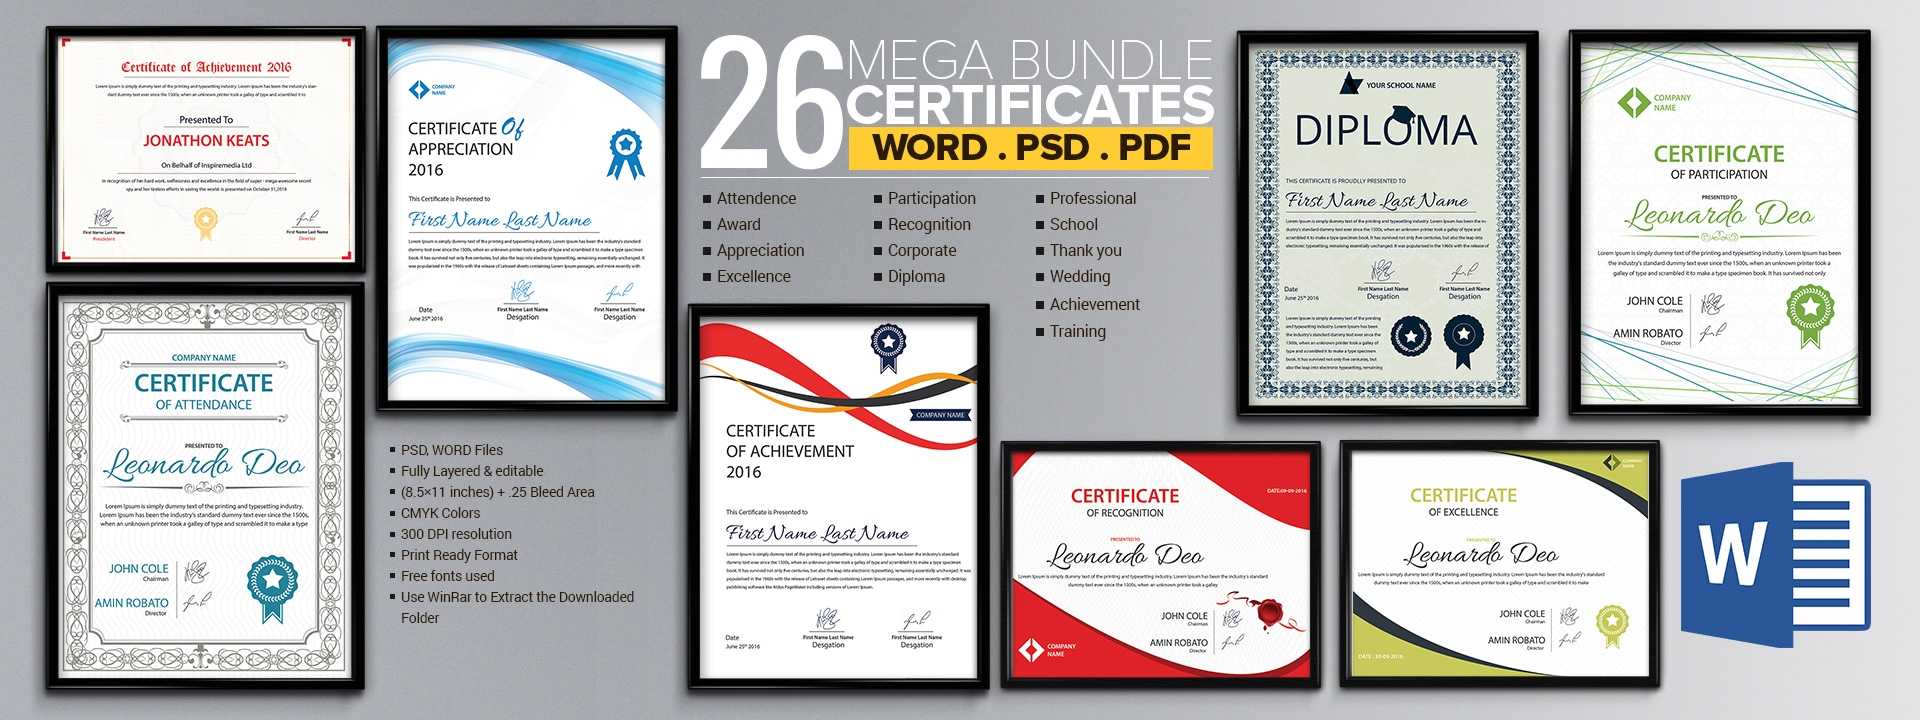 Word Certificate Template - 53+ Free Download Samples Regarding Award Certificate Templates Word 2007